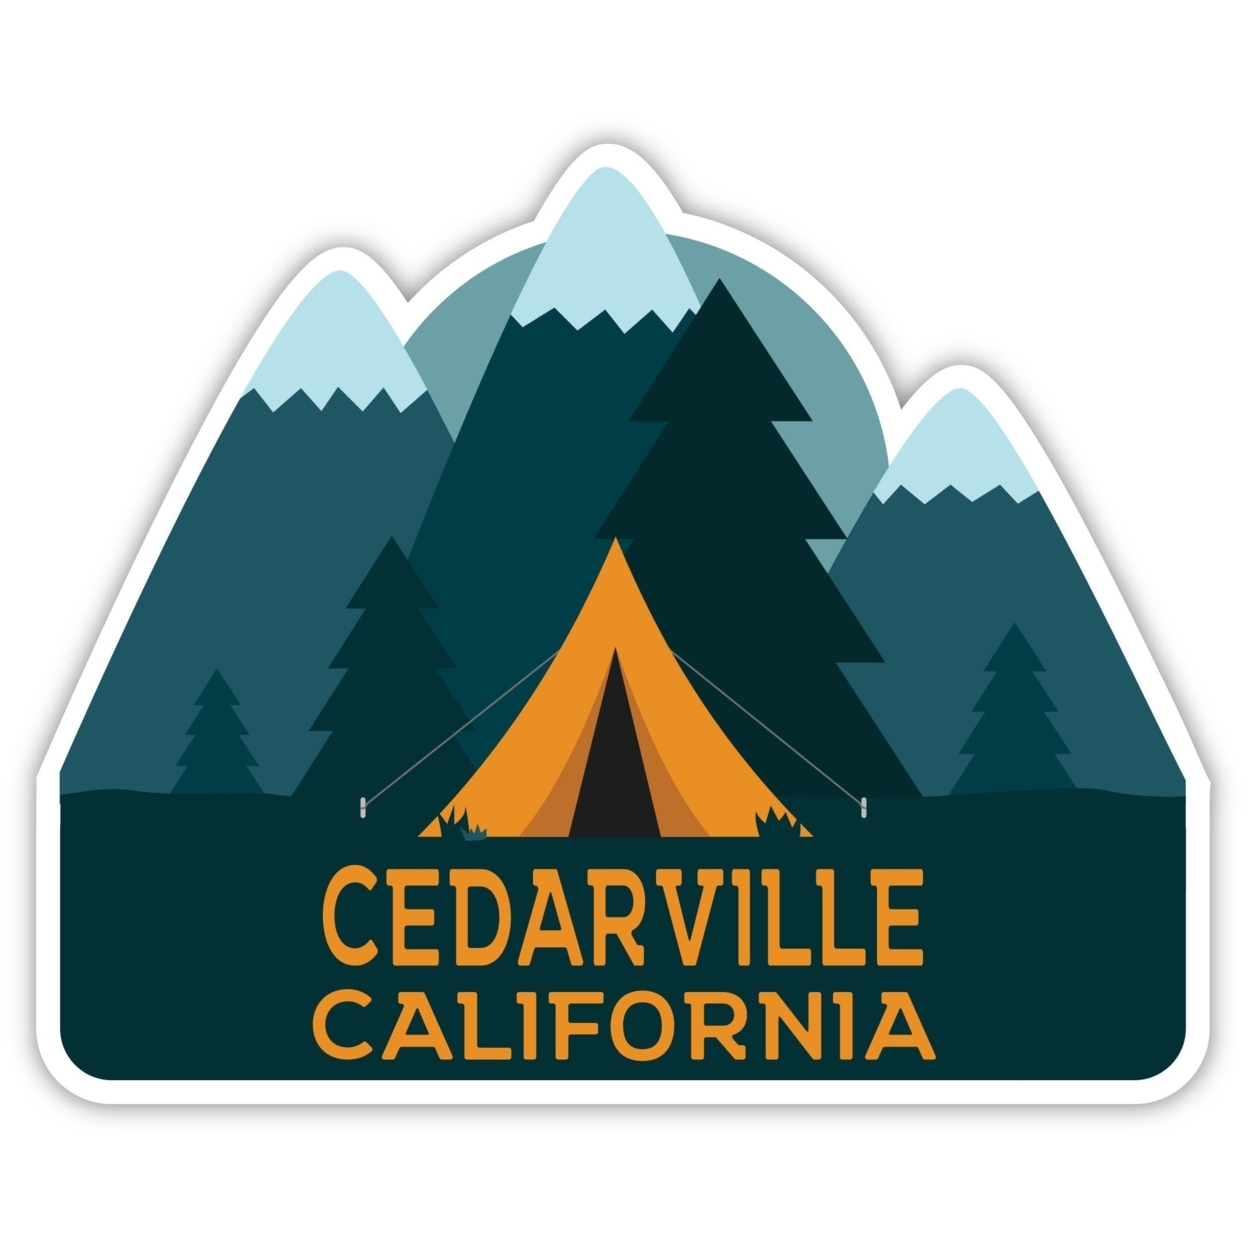 Cedarville California Souvenir Decorative Stickers (Choose Theme And Size) - 4-Pack, 10-Inch, Tent